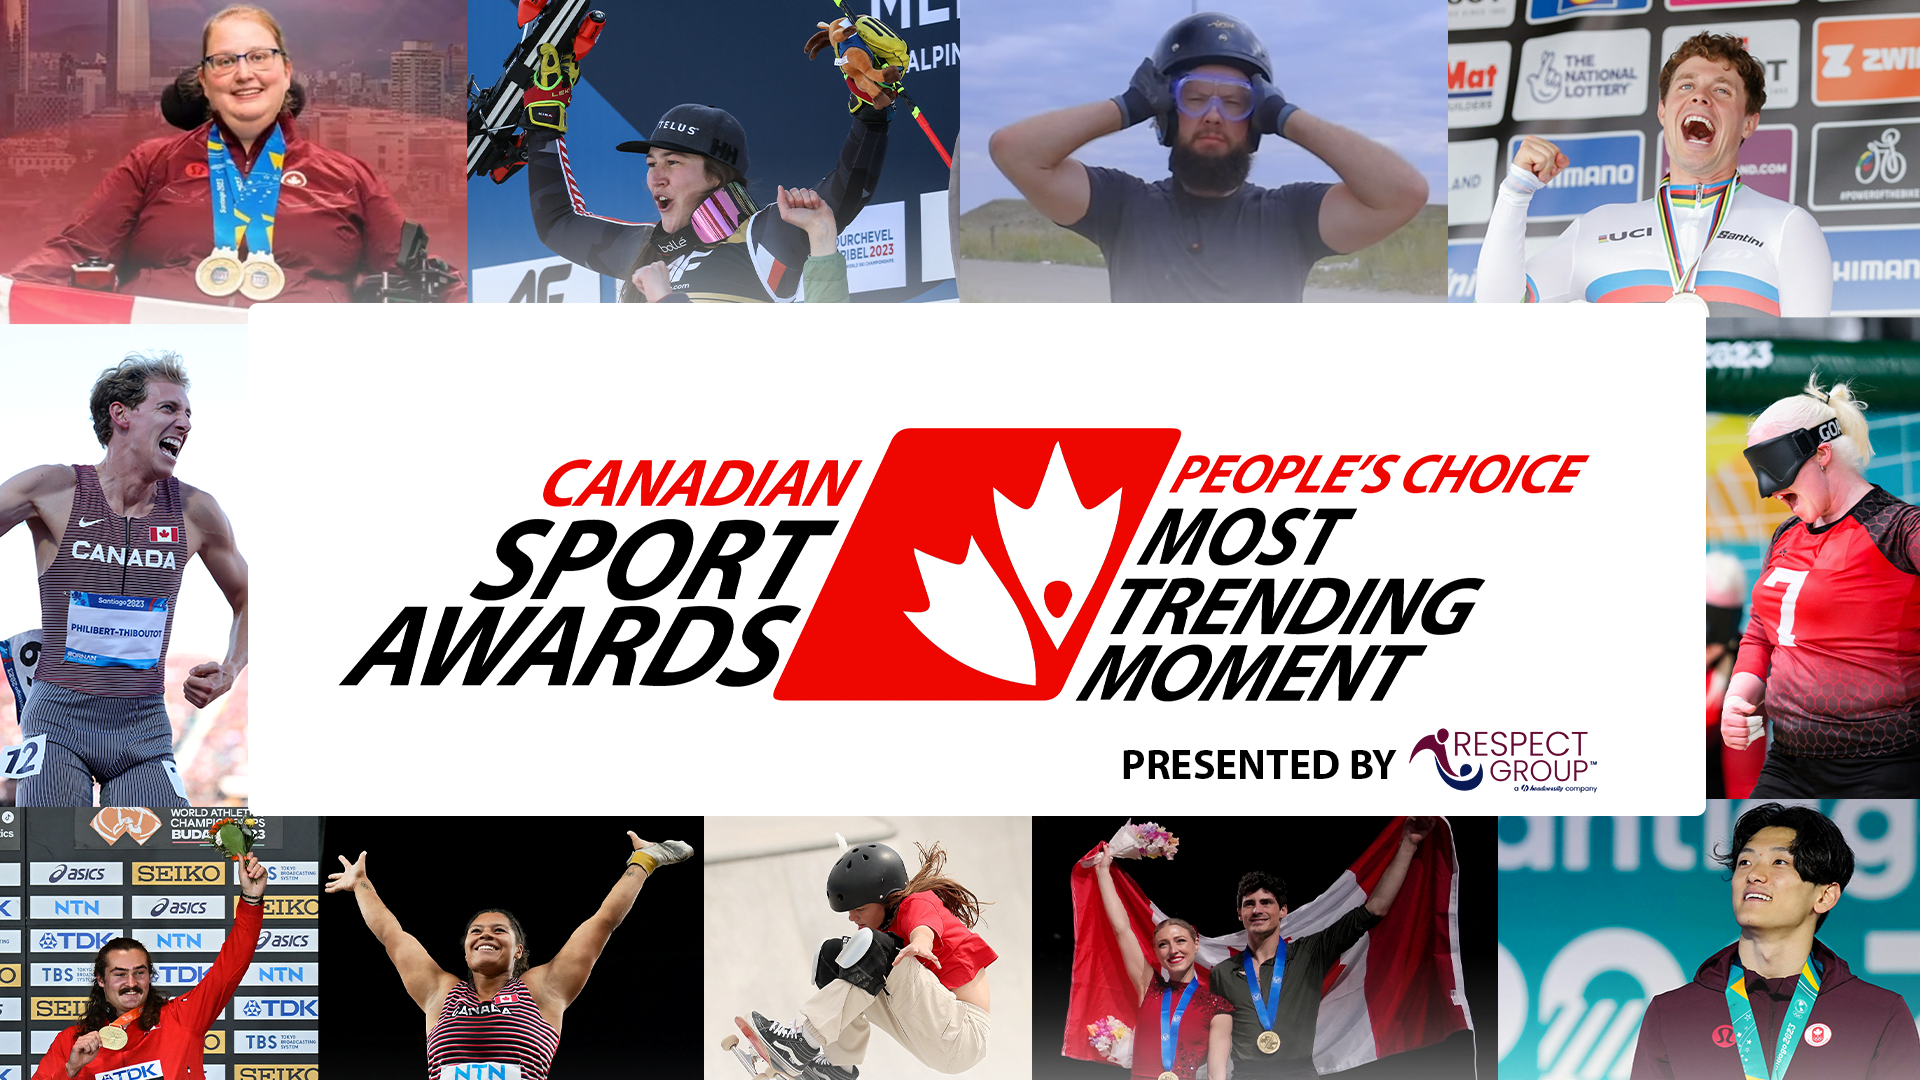 46th Canadian Sport Awards: Nominees unveiled, Respect Group named Presenting Sponsor for Most Trending Moment of Year Award